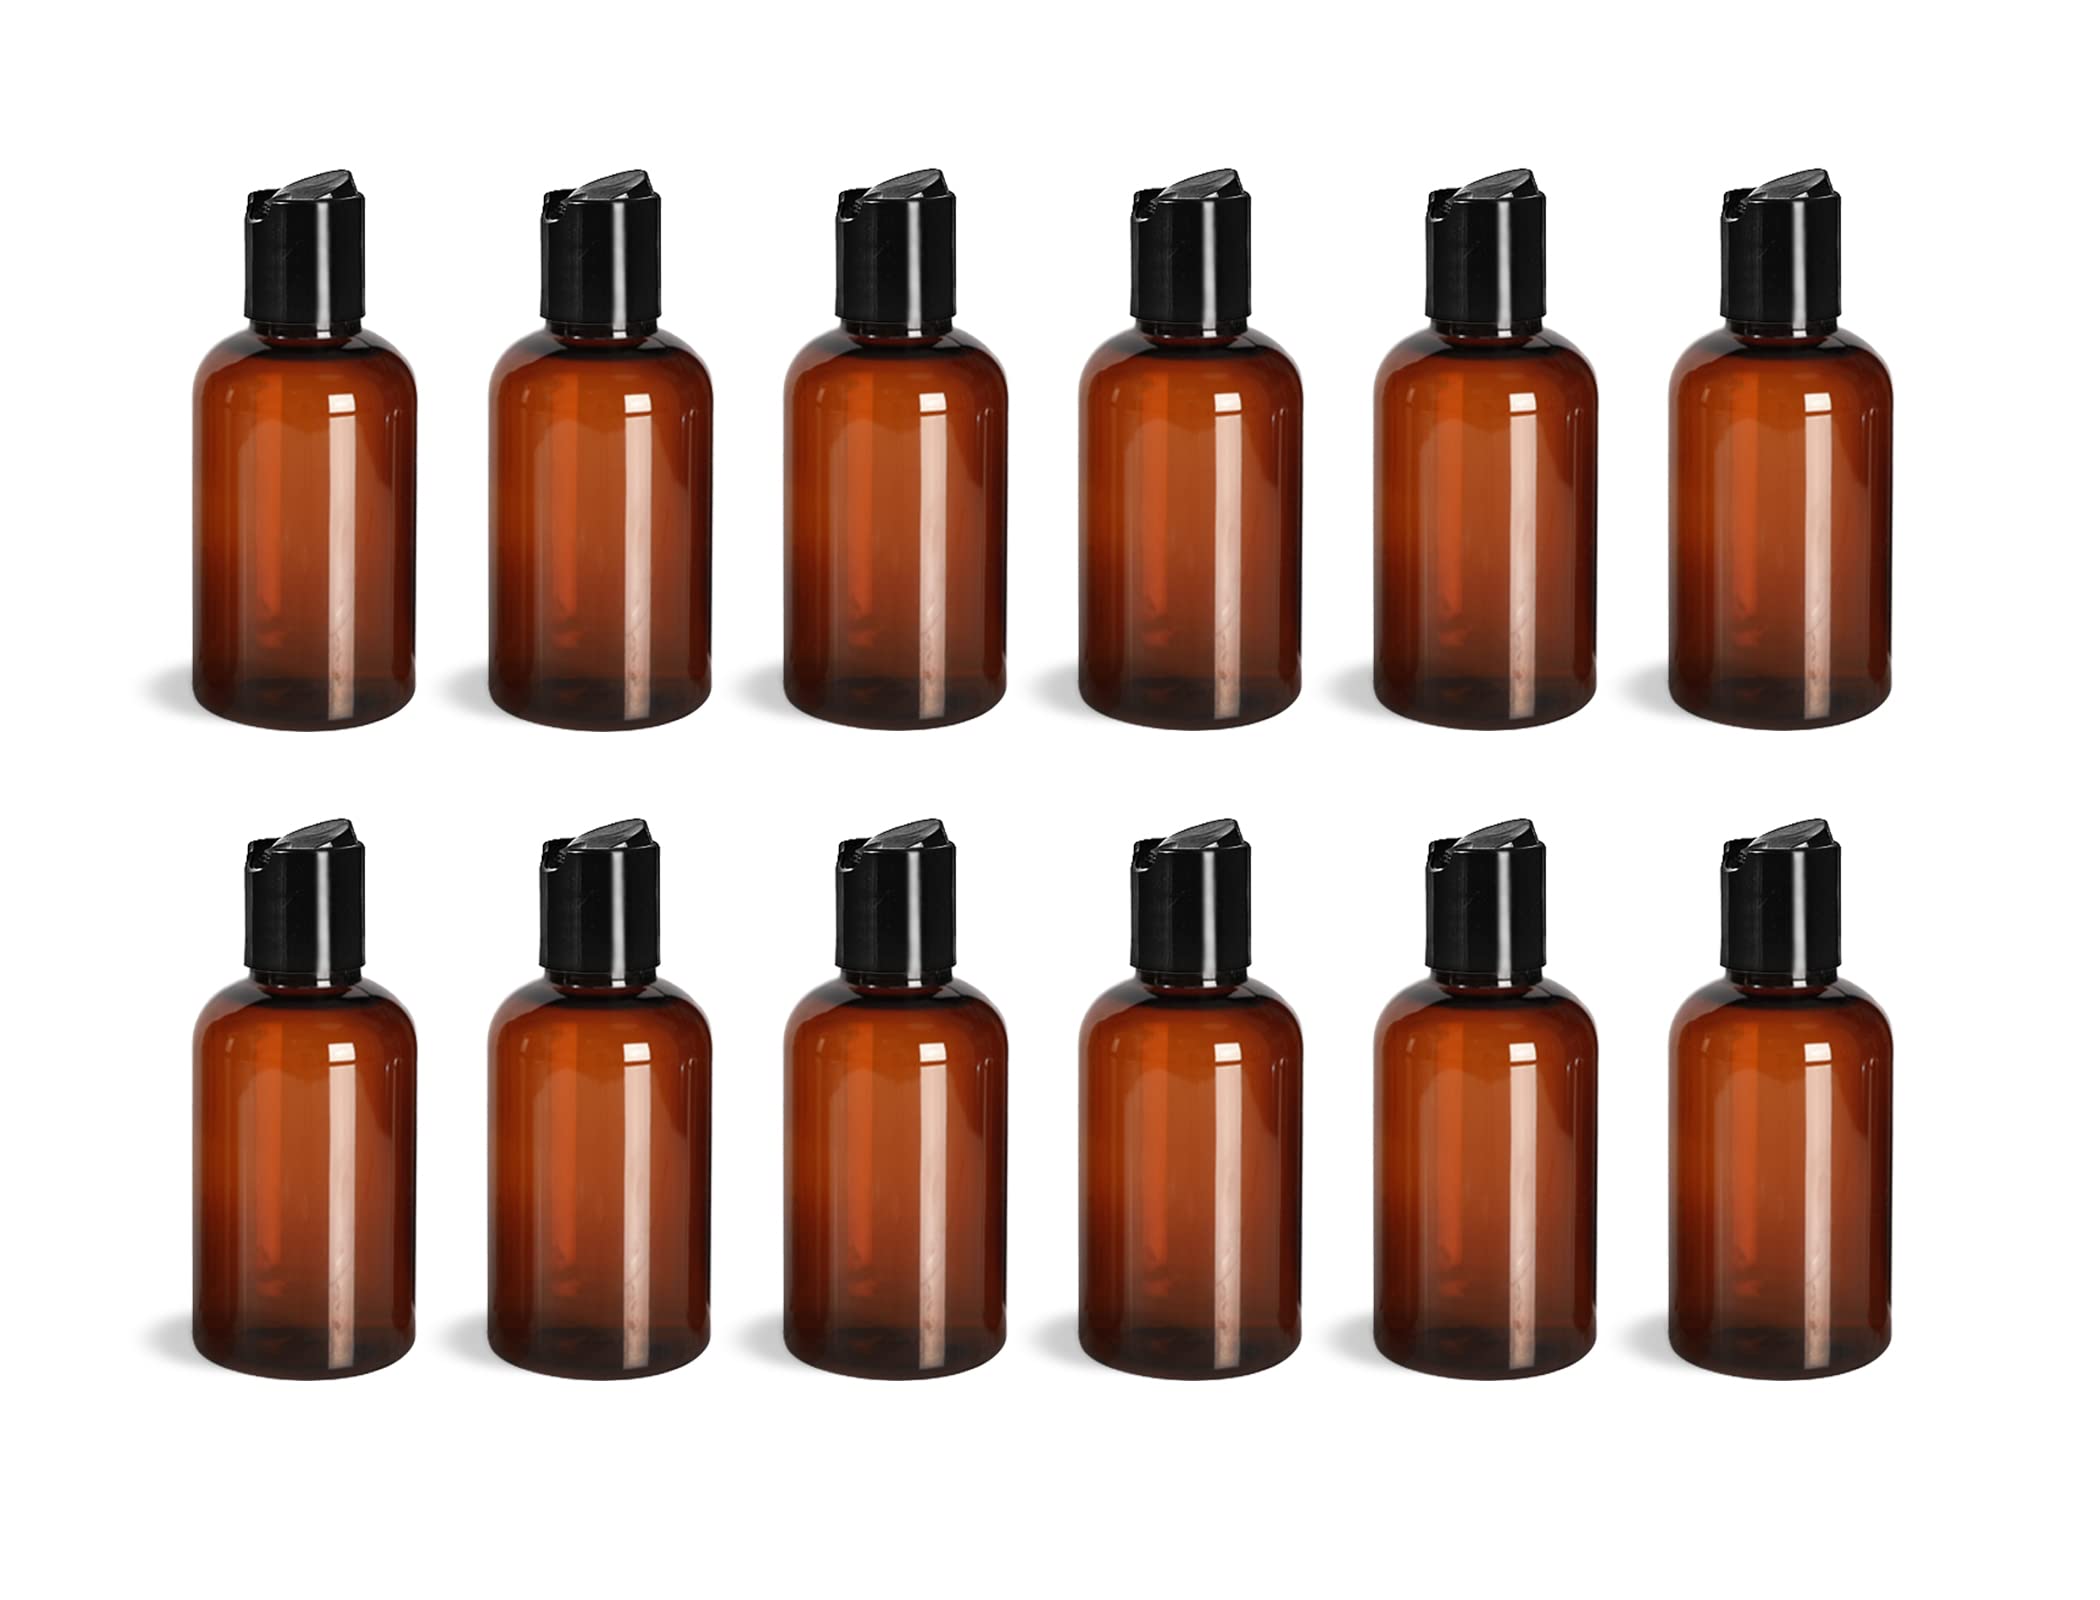 ljdeals 2 oz Amber PET Plastic Refillable Bottles with Black Disc Top Caps, Pack of 12, BPA Free, TSA Approved, Made in USA